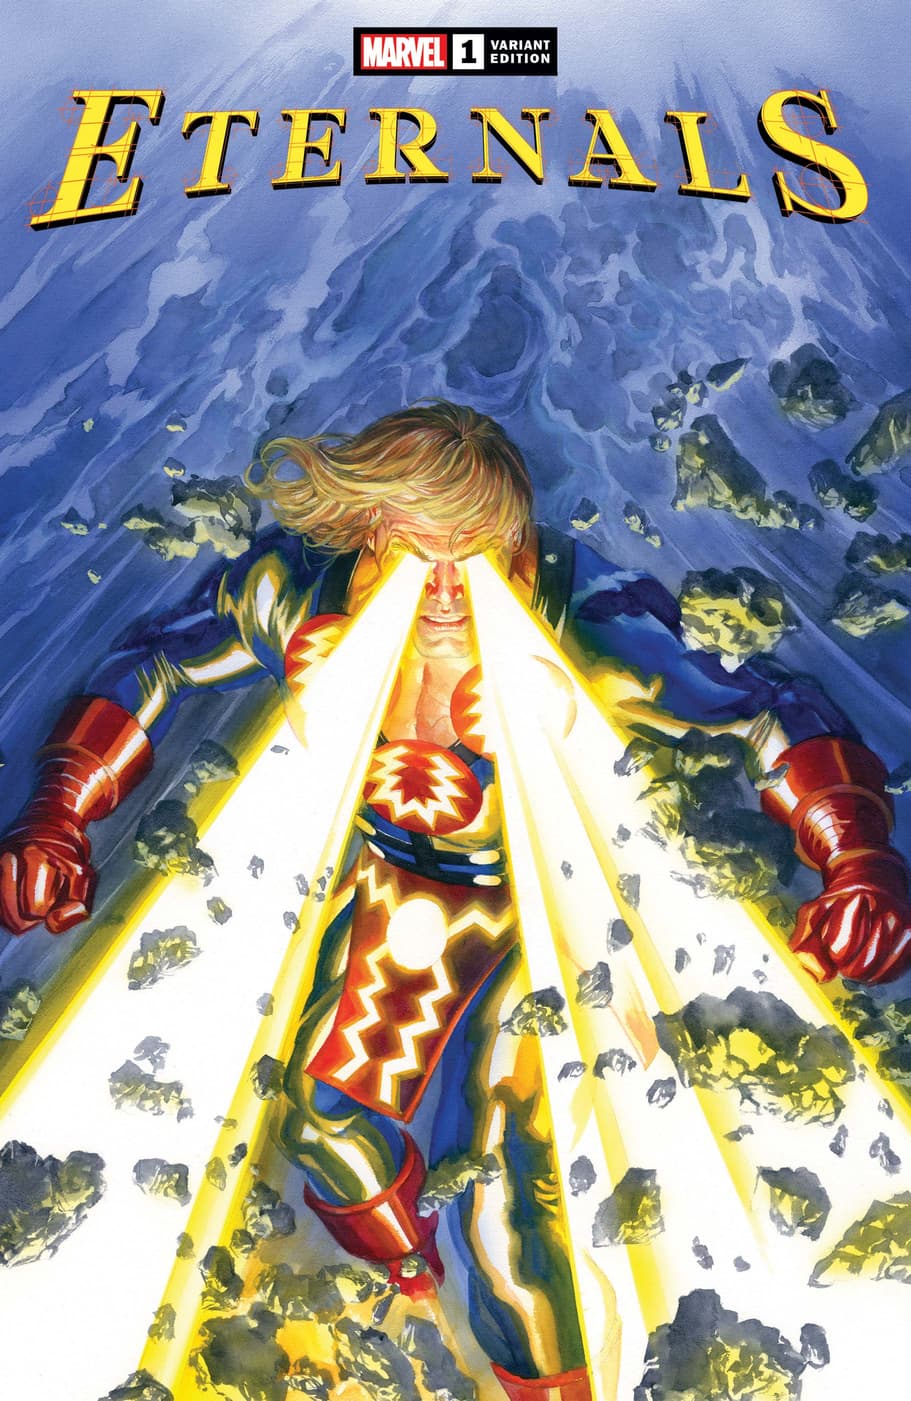 ETERNALS #1 variant cover by Alex Ross